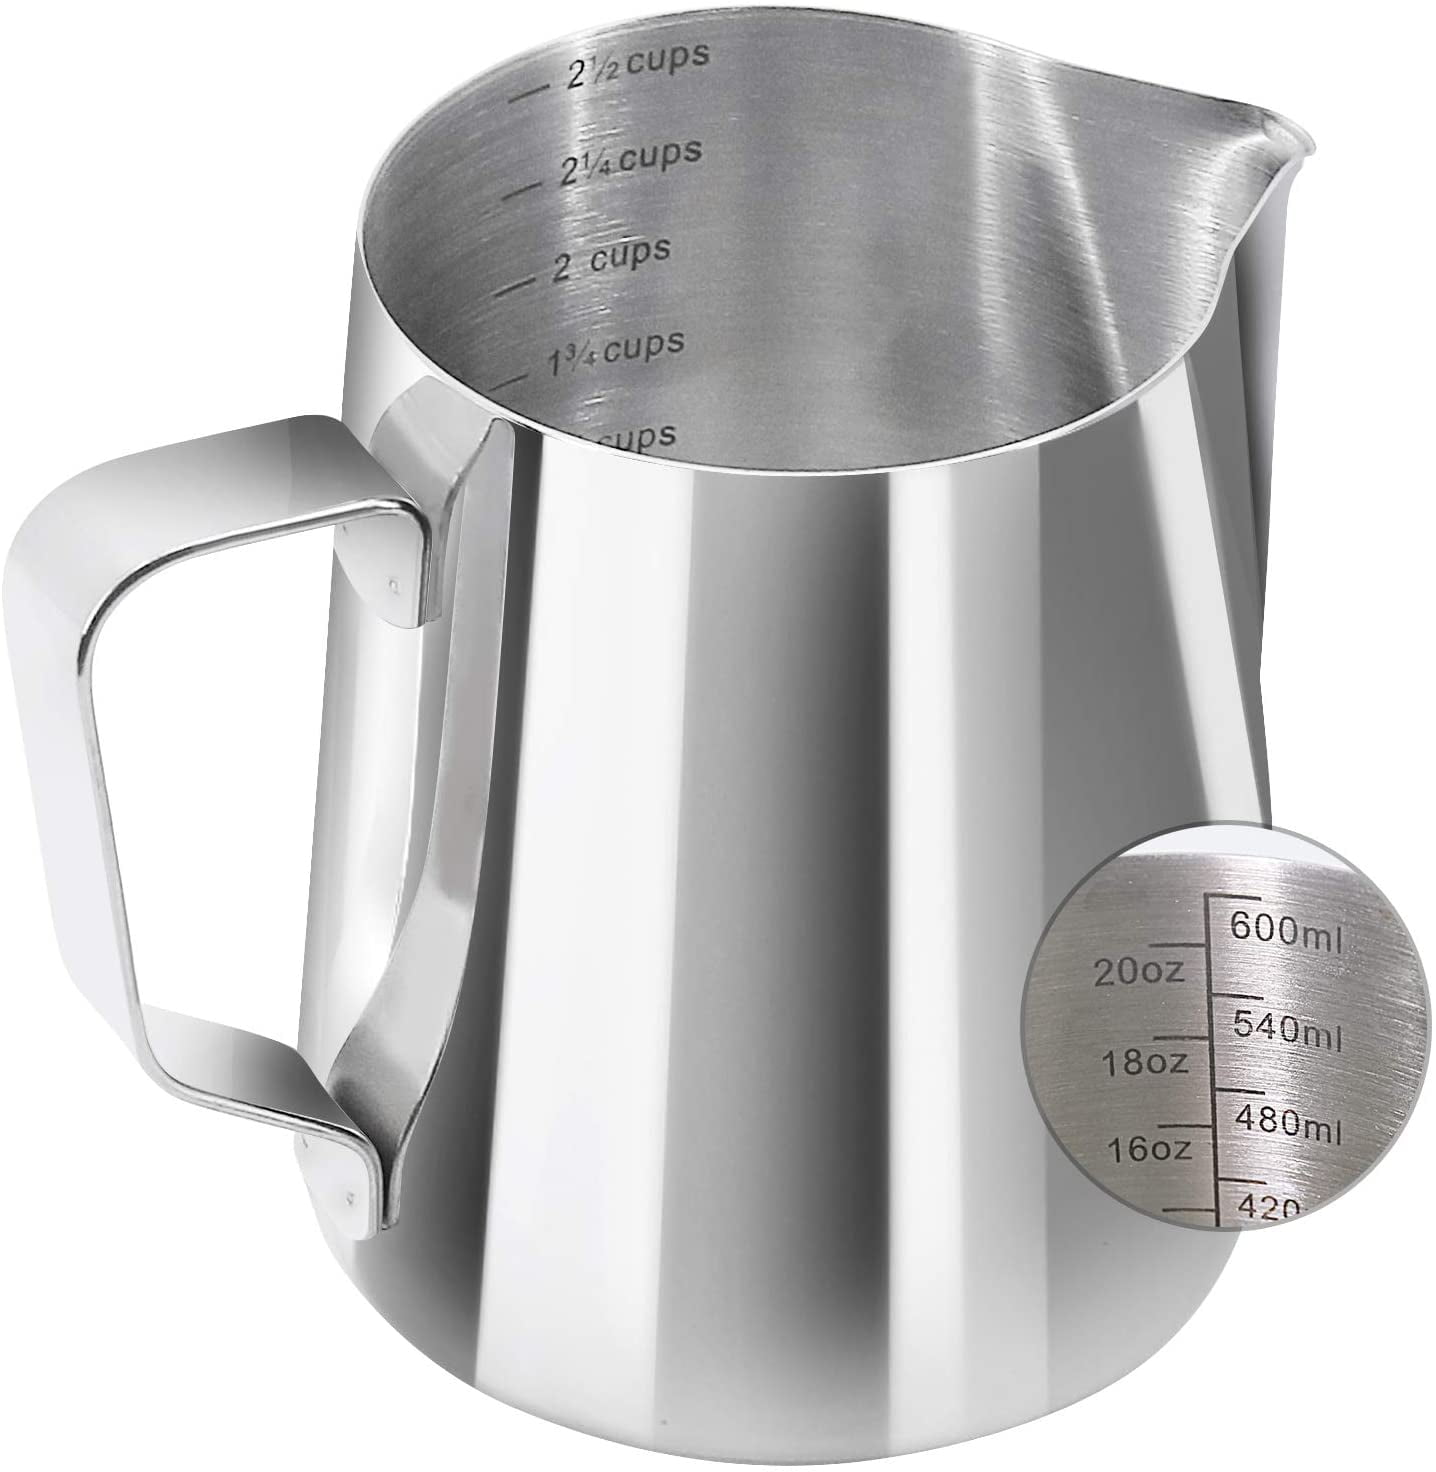 600ML Stainless Steel Milk Pitcher Measuring Scale Frother Coffee Silver 